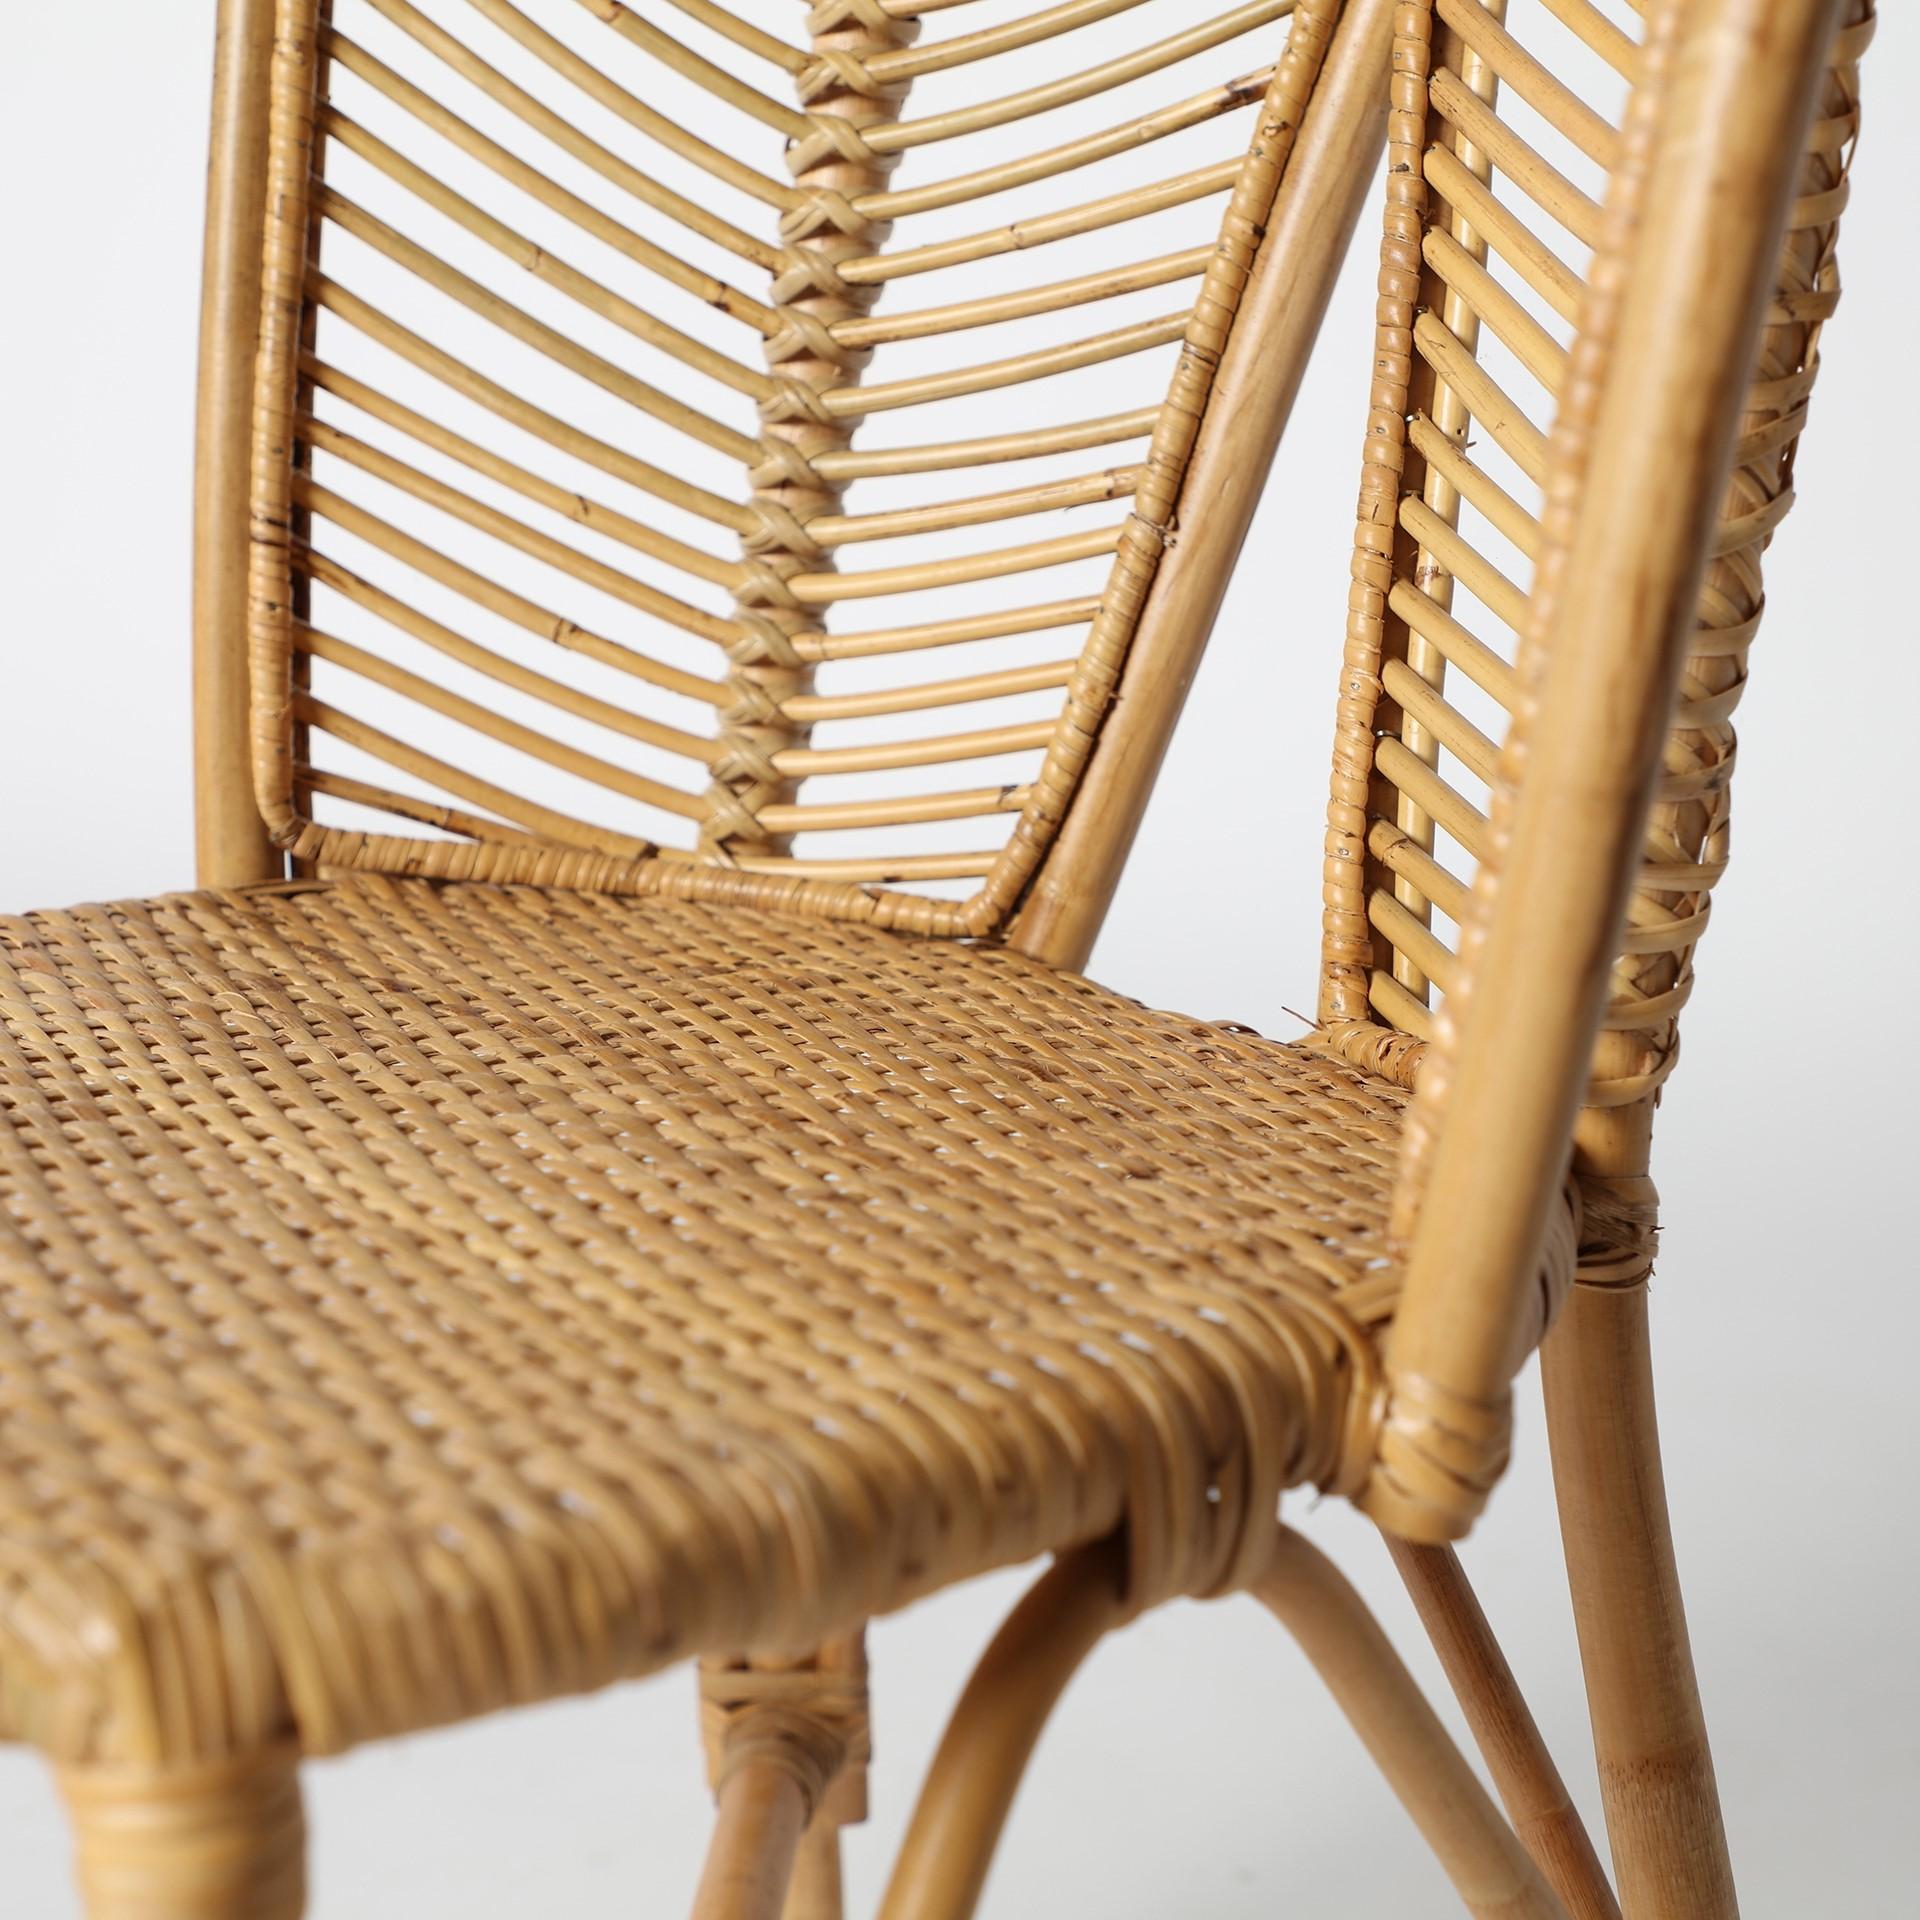 1960s Italian Design Style sculptural and gorgeous chair all in rattan and aerial structure with handbraided rattan wicker seat.